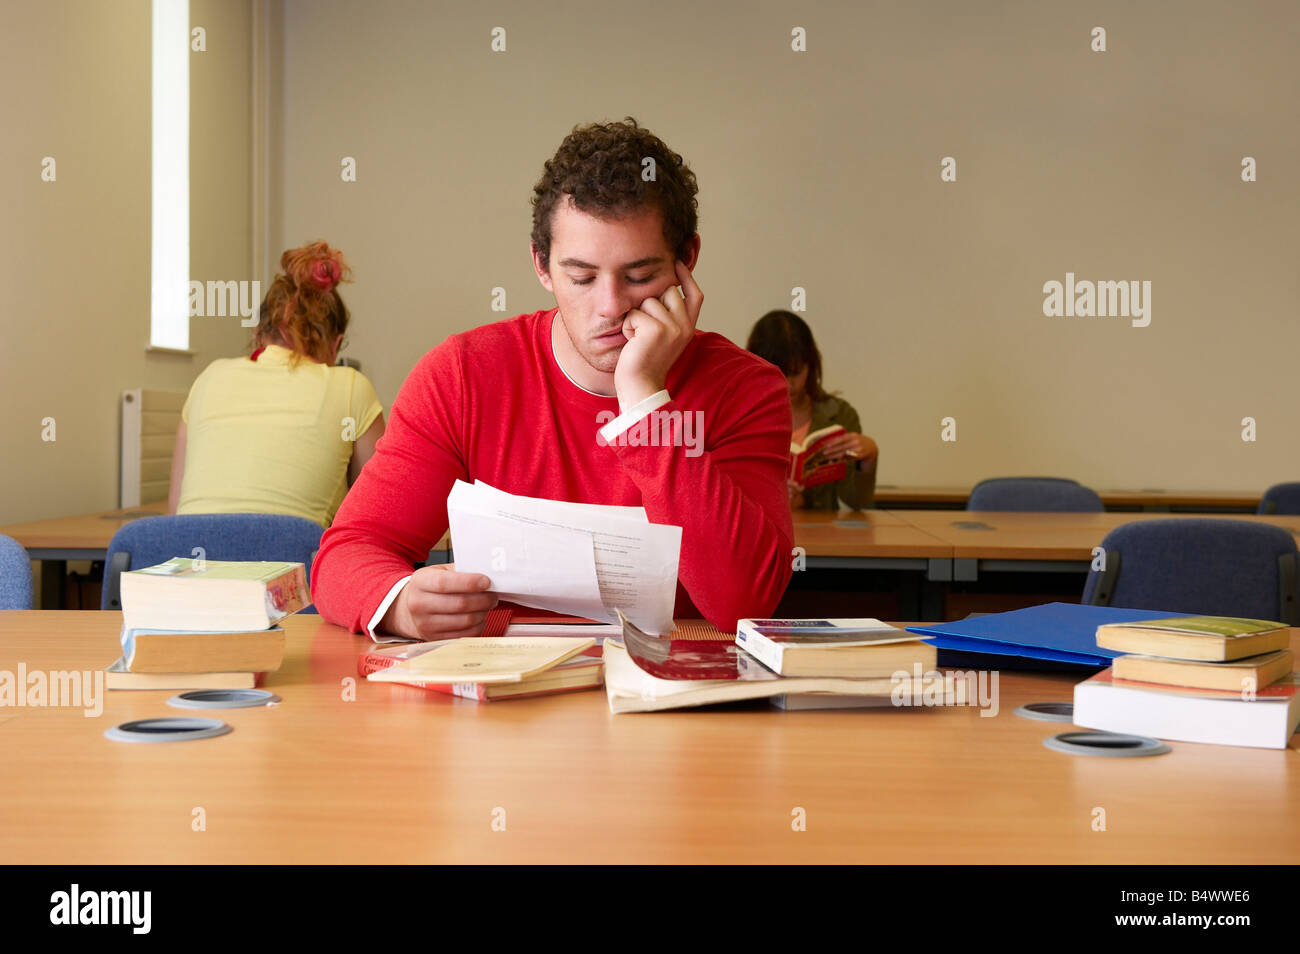 Bored young man seated at desk studying Stock Photo